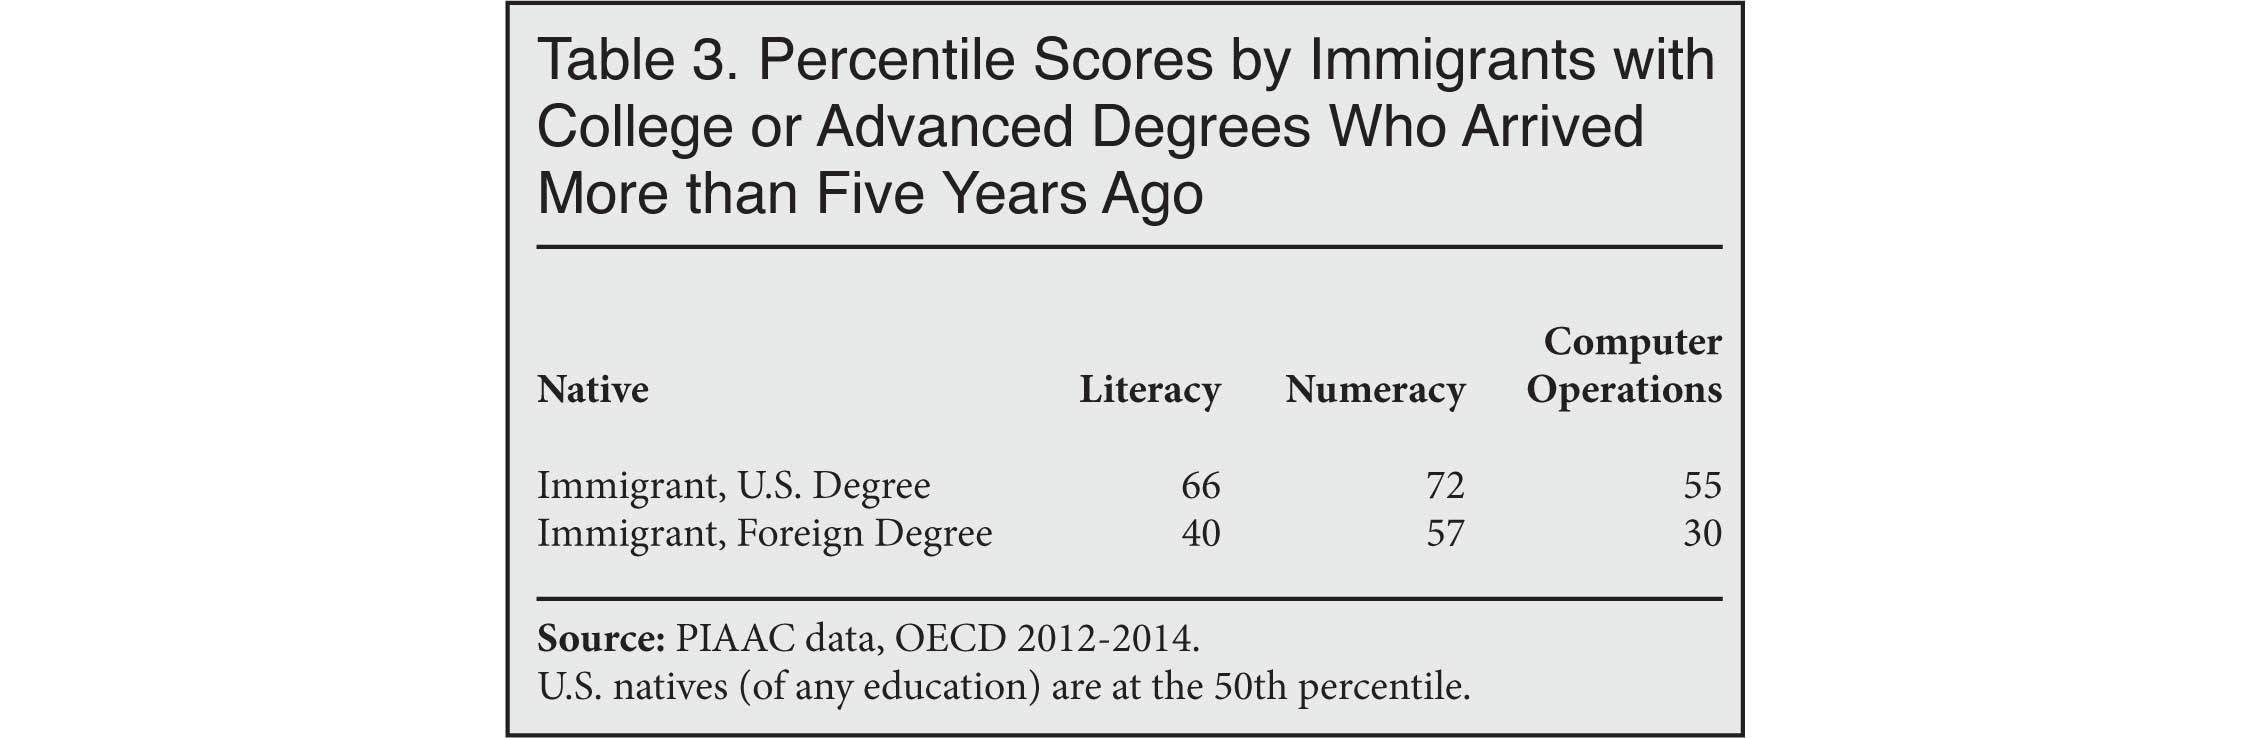 Table: Percentile Scores by Immigrants with College or Advanced Degrees Who Arrived More than Five Years Ago